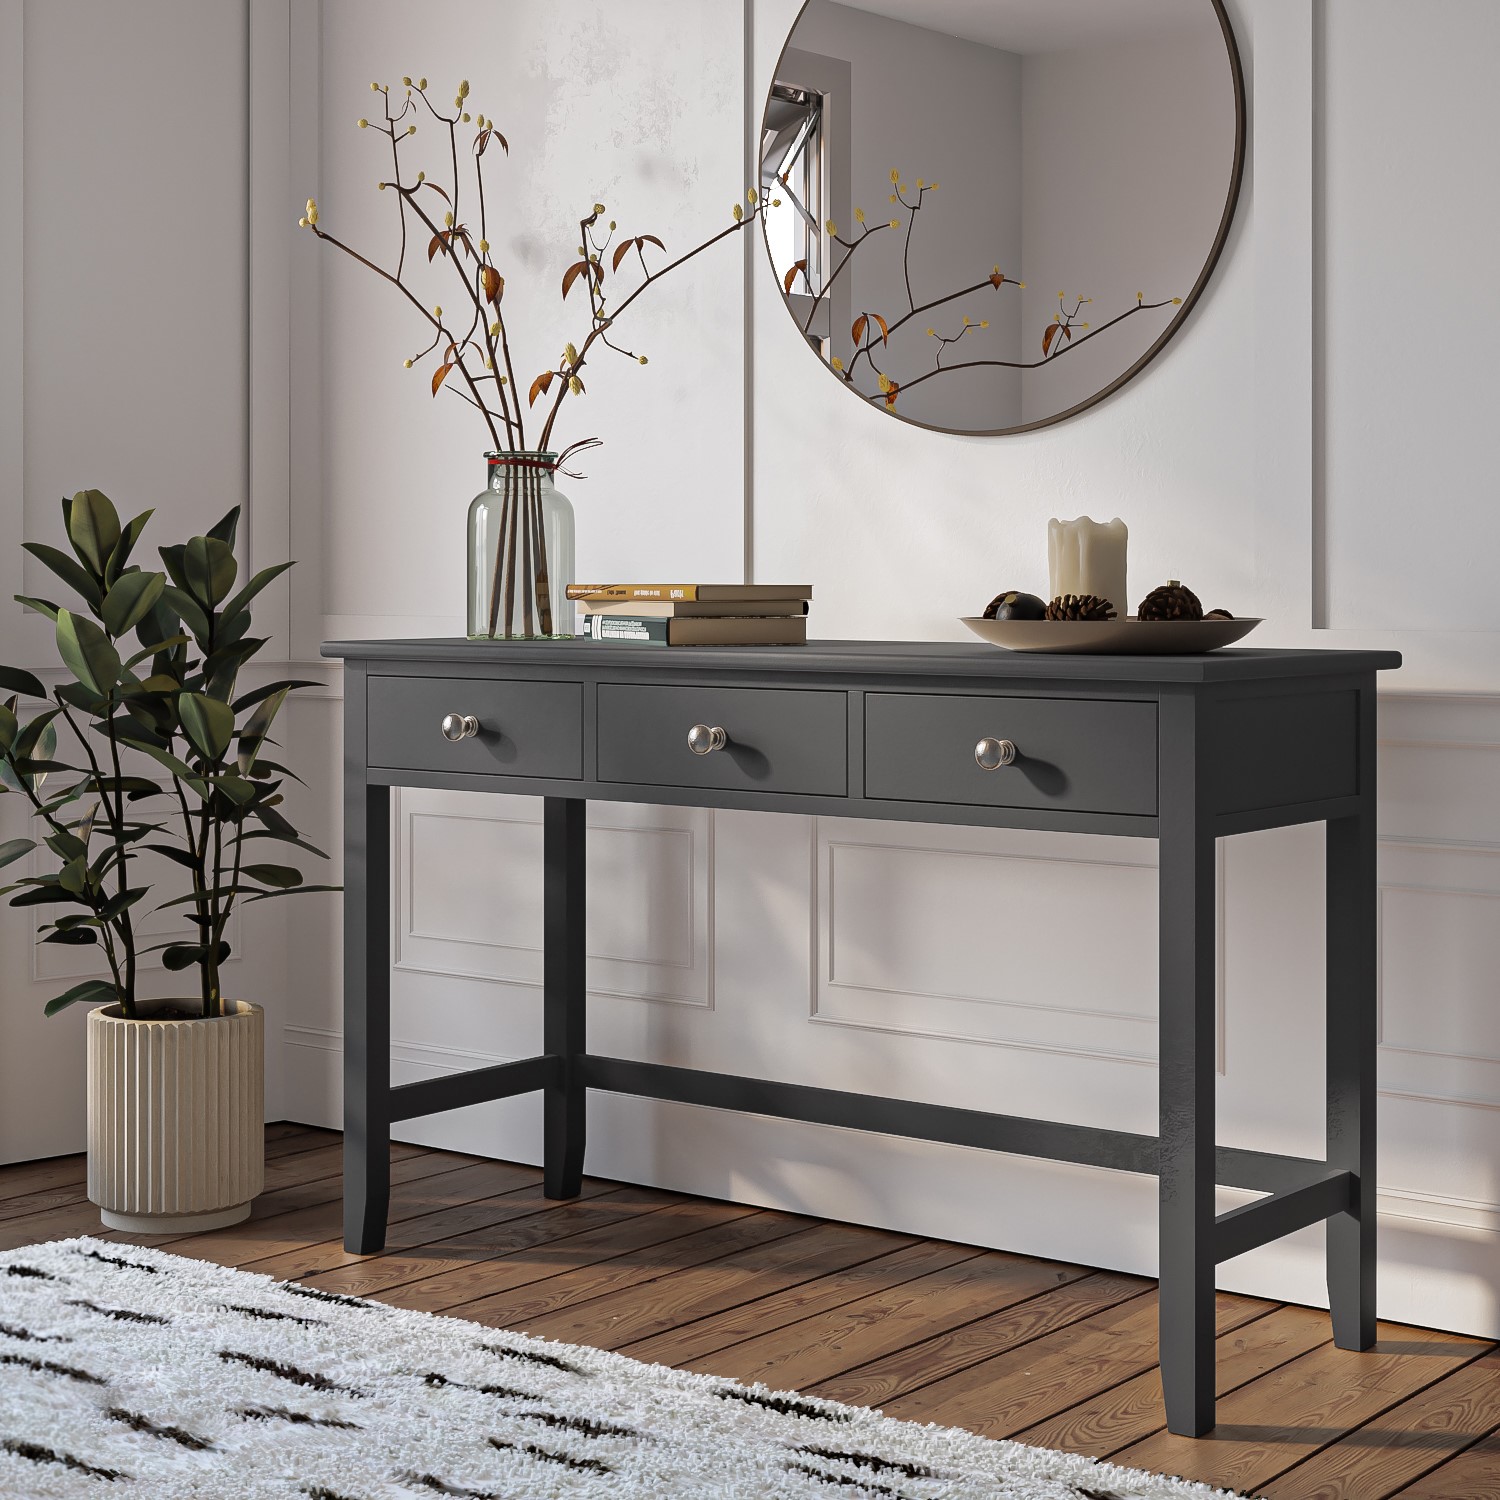 Photo of Grey painted dressing table with 3 drawers - harper